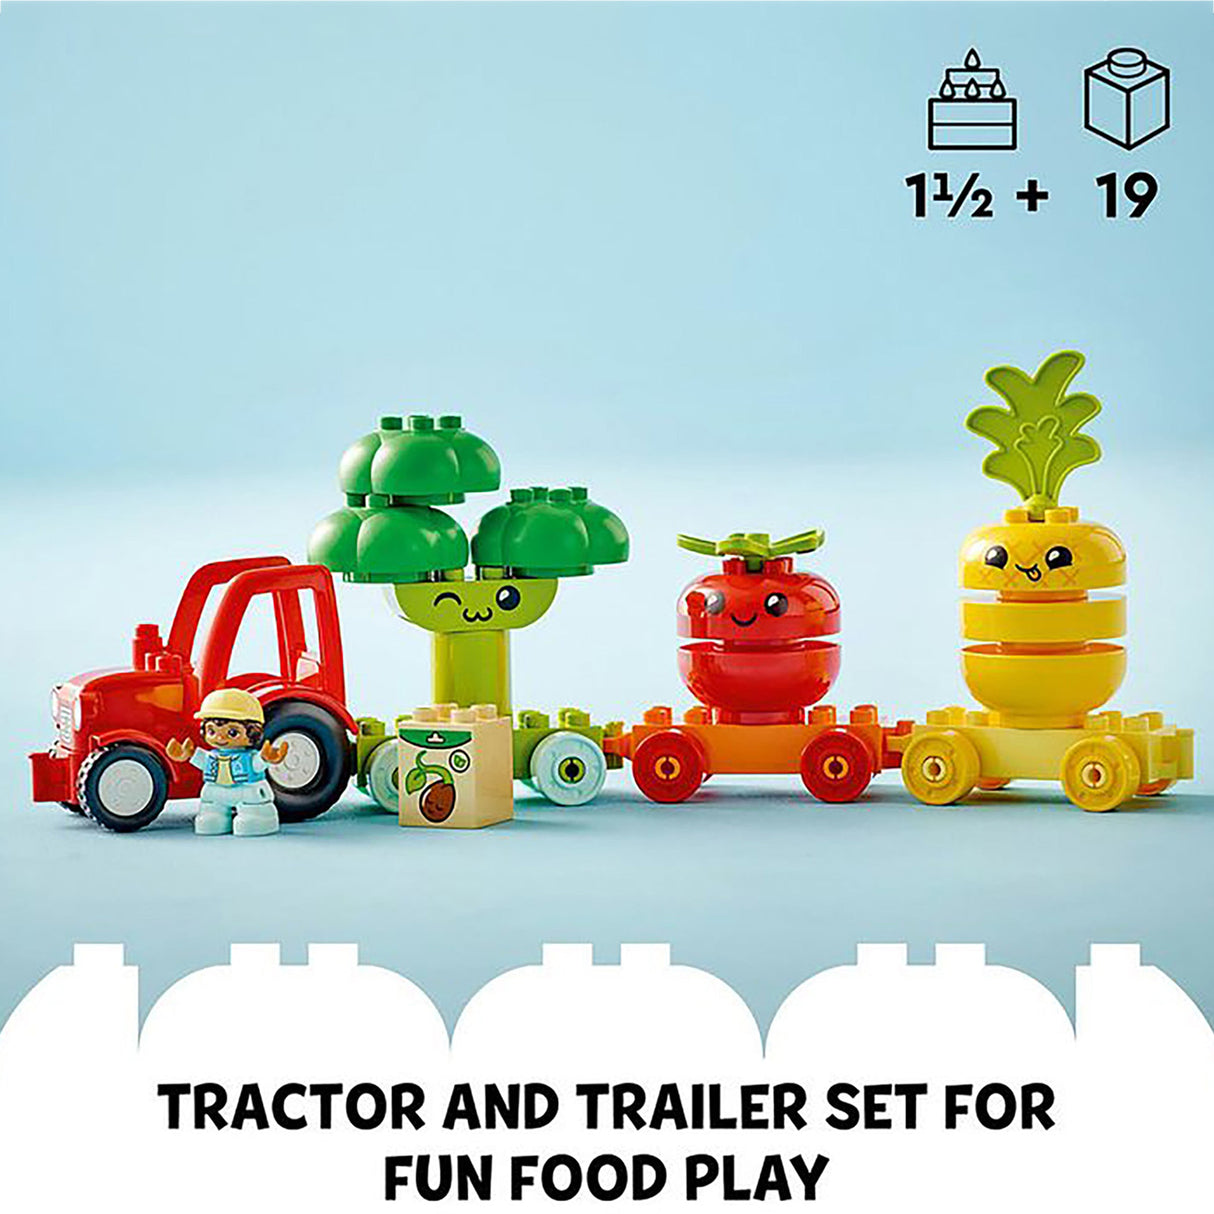 LEGO DUPLO My First Fruit and Vegetable Tractor 10982 (19 pieces)